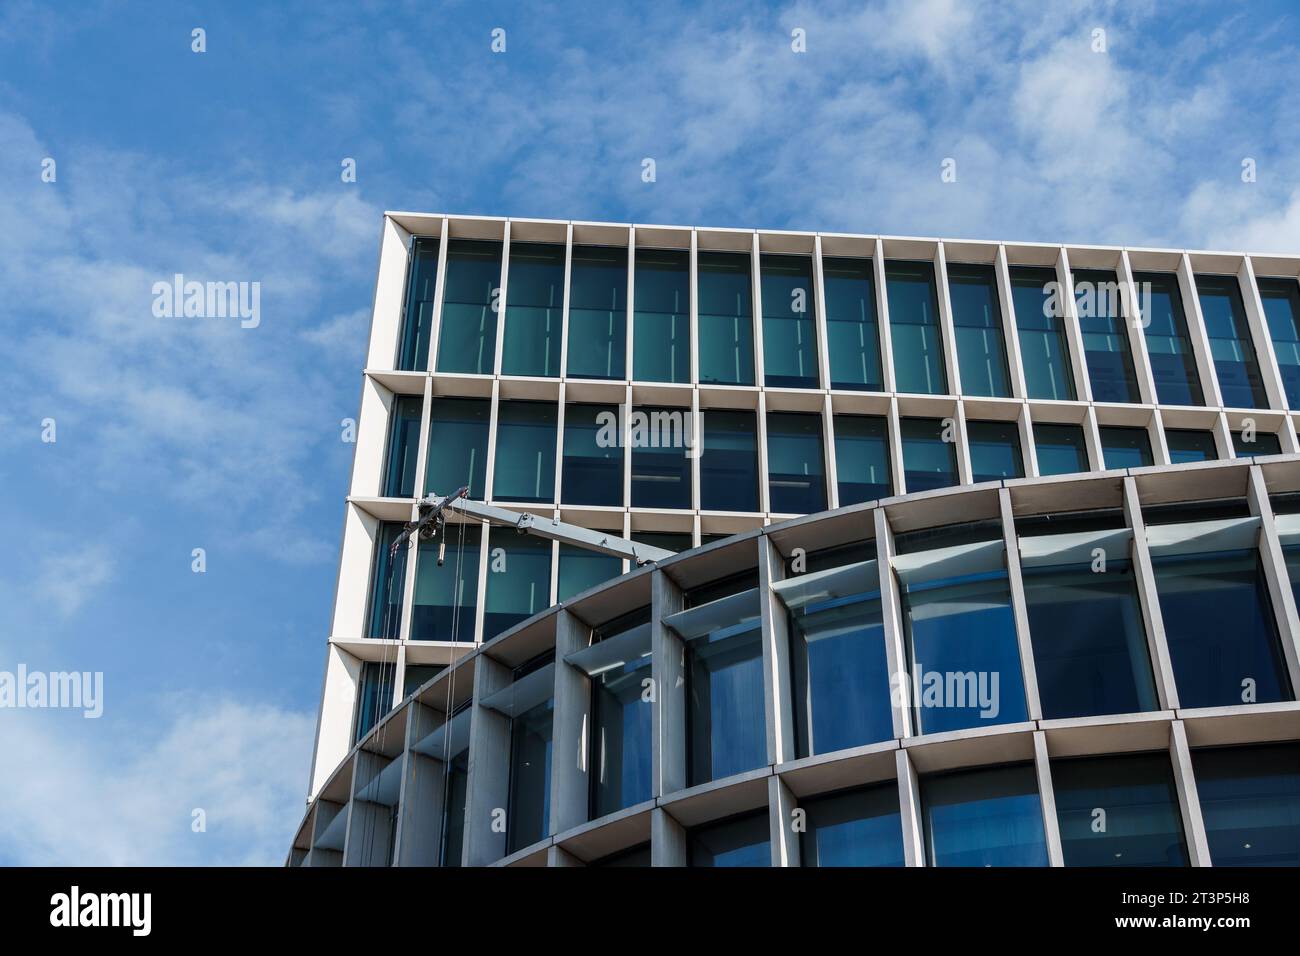 London, UK - August 25, 2023: Modern office building in the City of London. Low angle view against blue sky with white clouds. Stock Photo